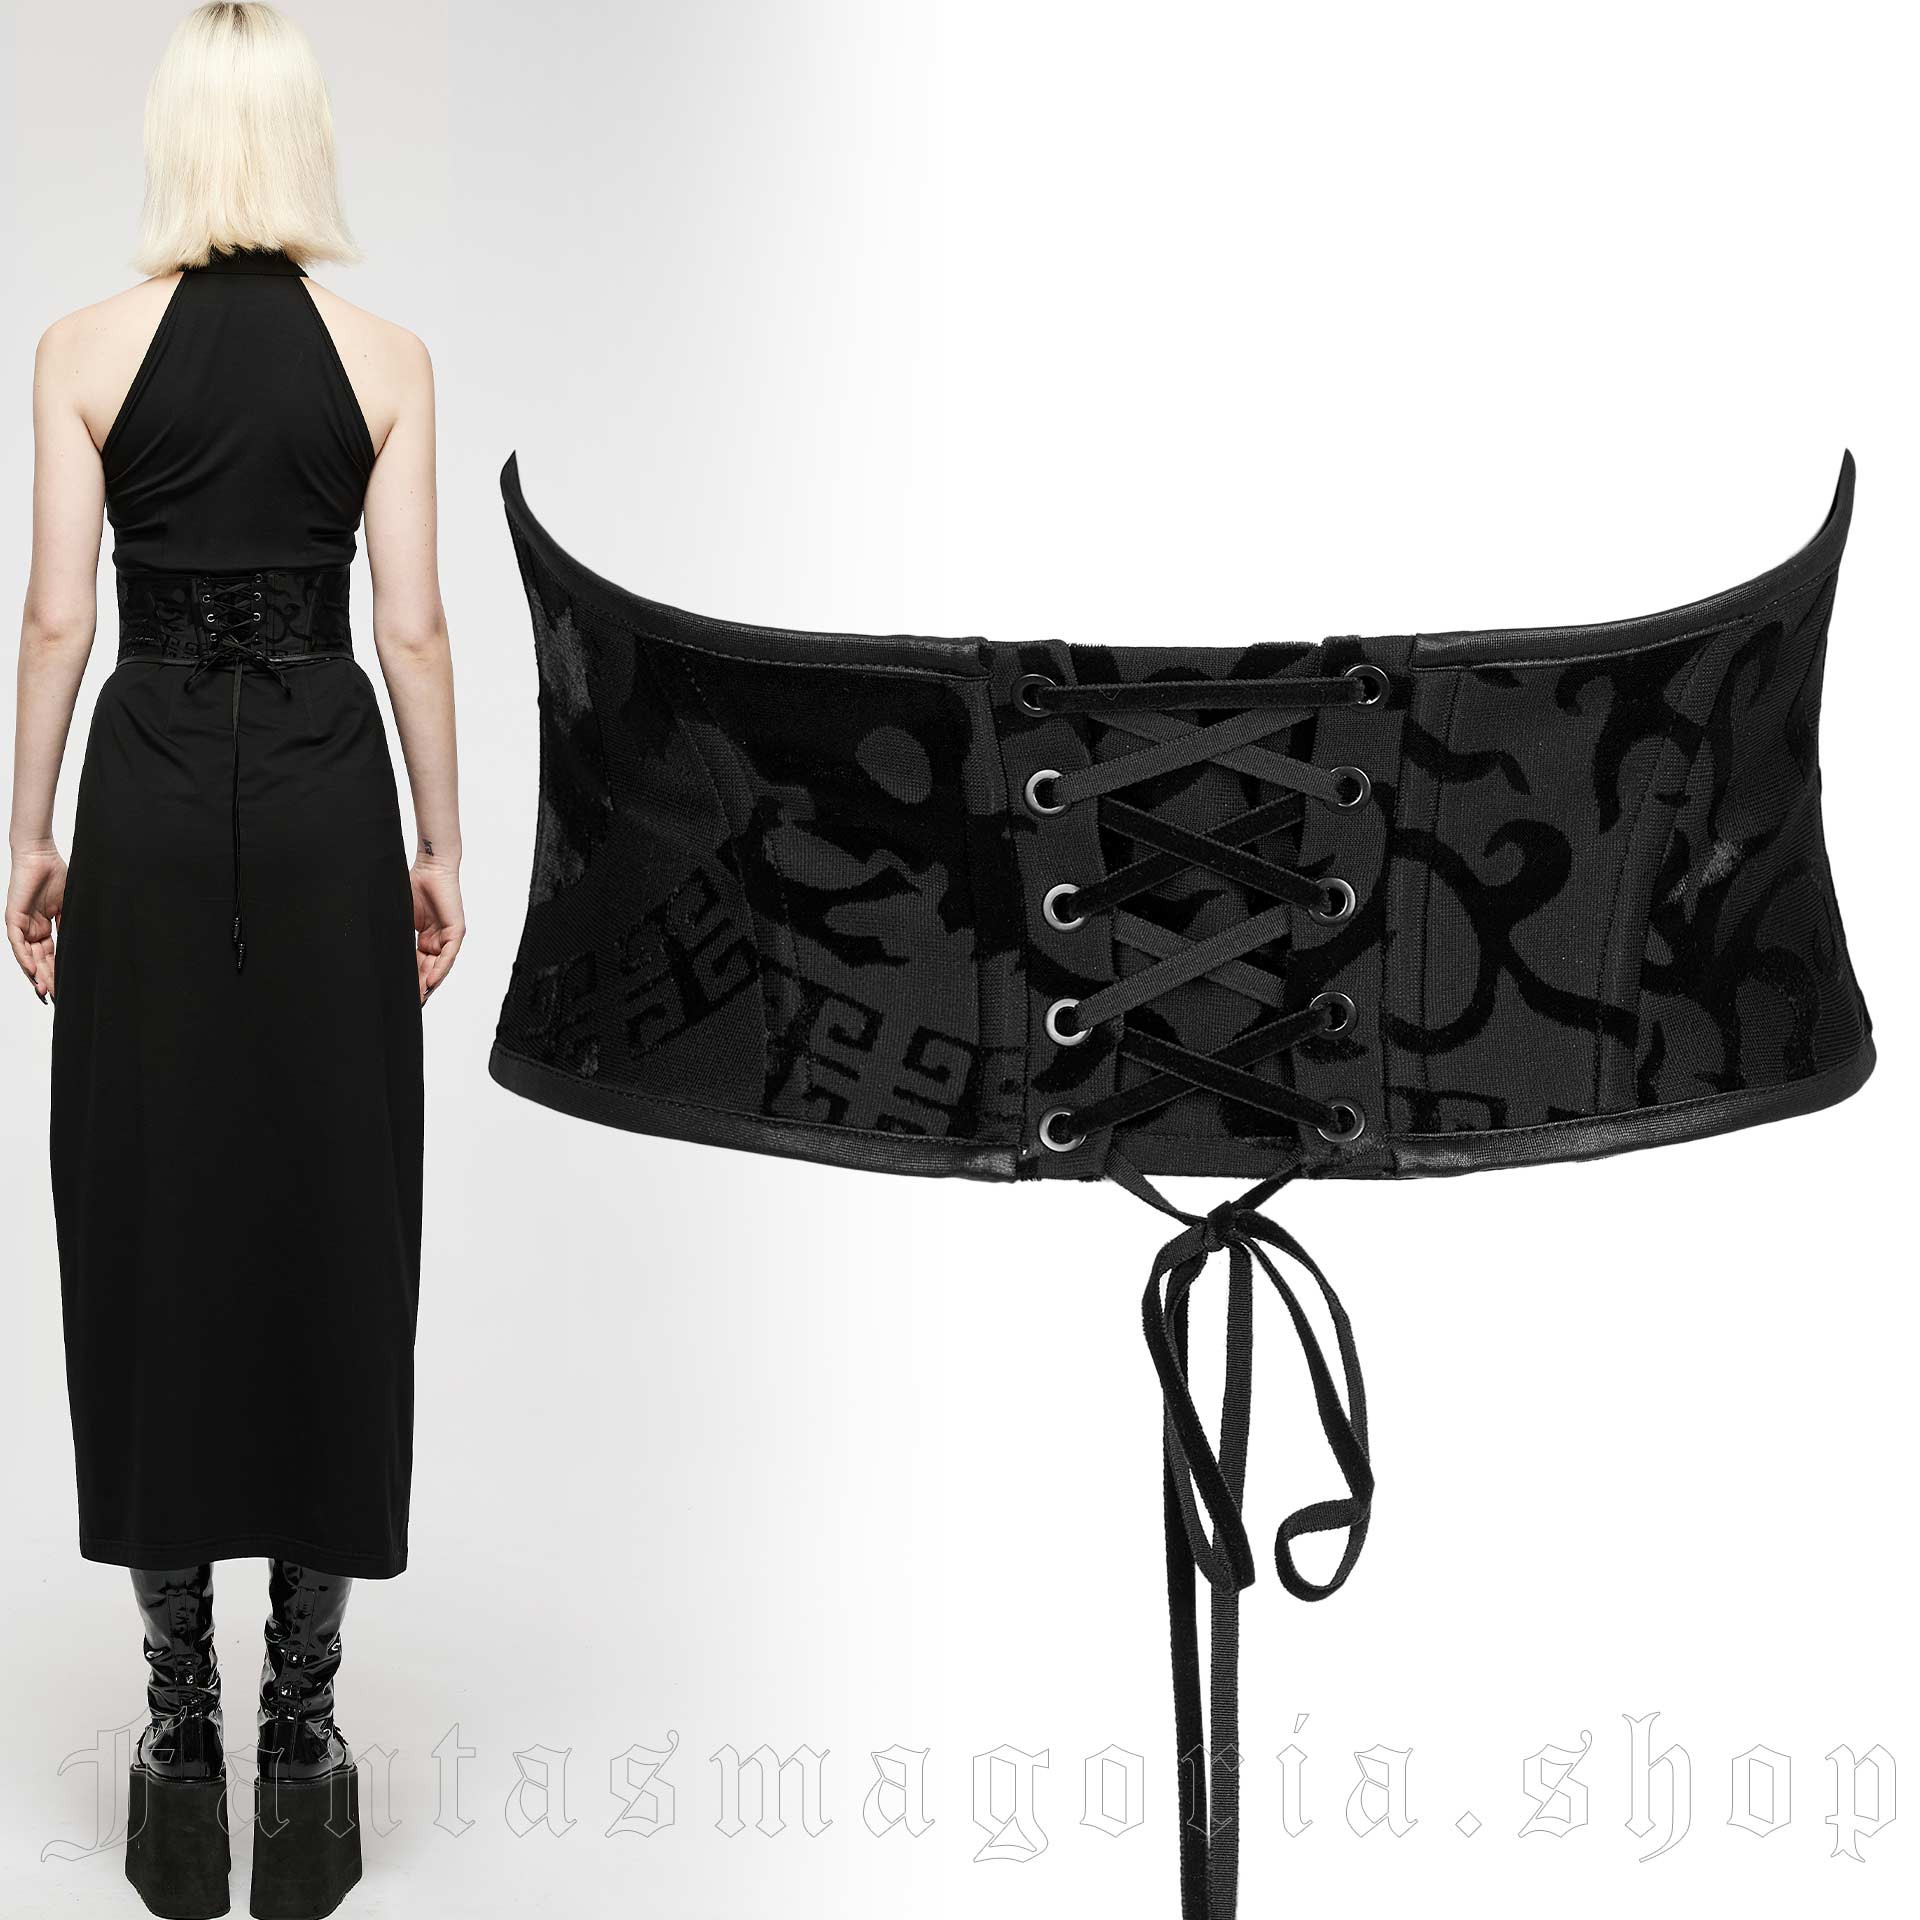 Complete The Look With Wholesale waist cinch belts 